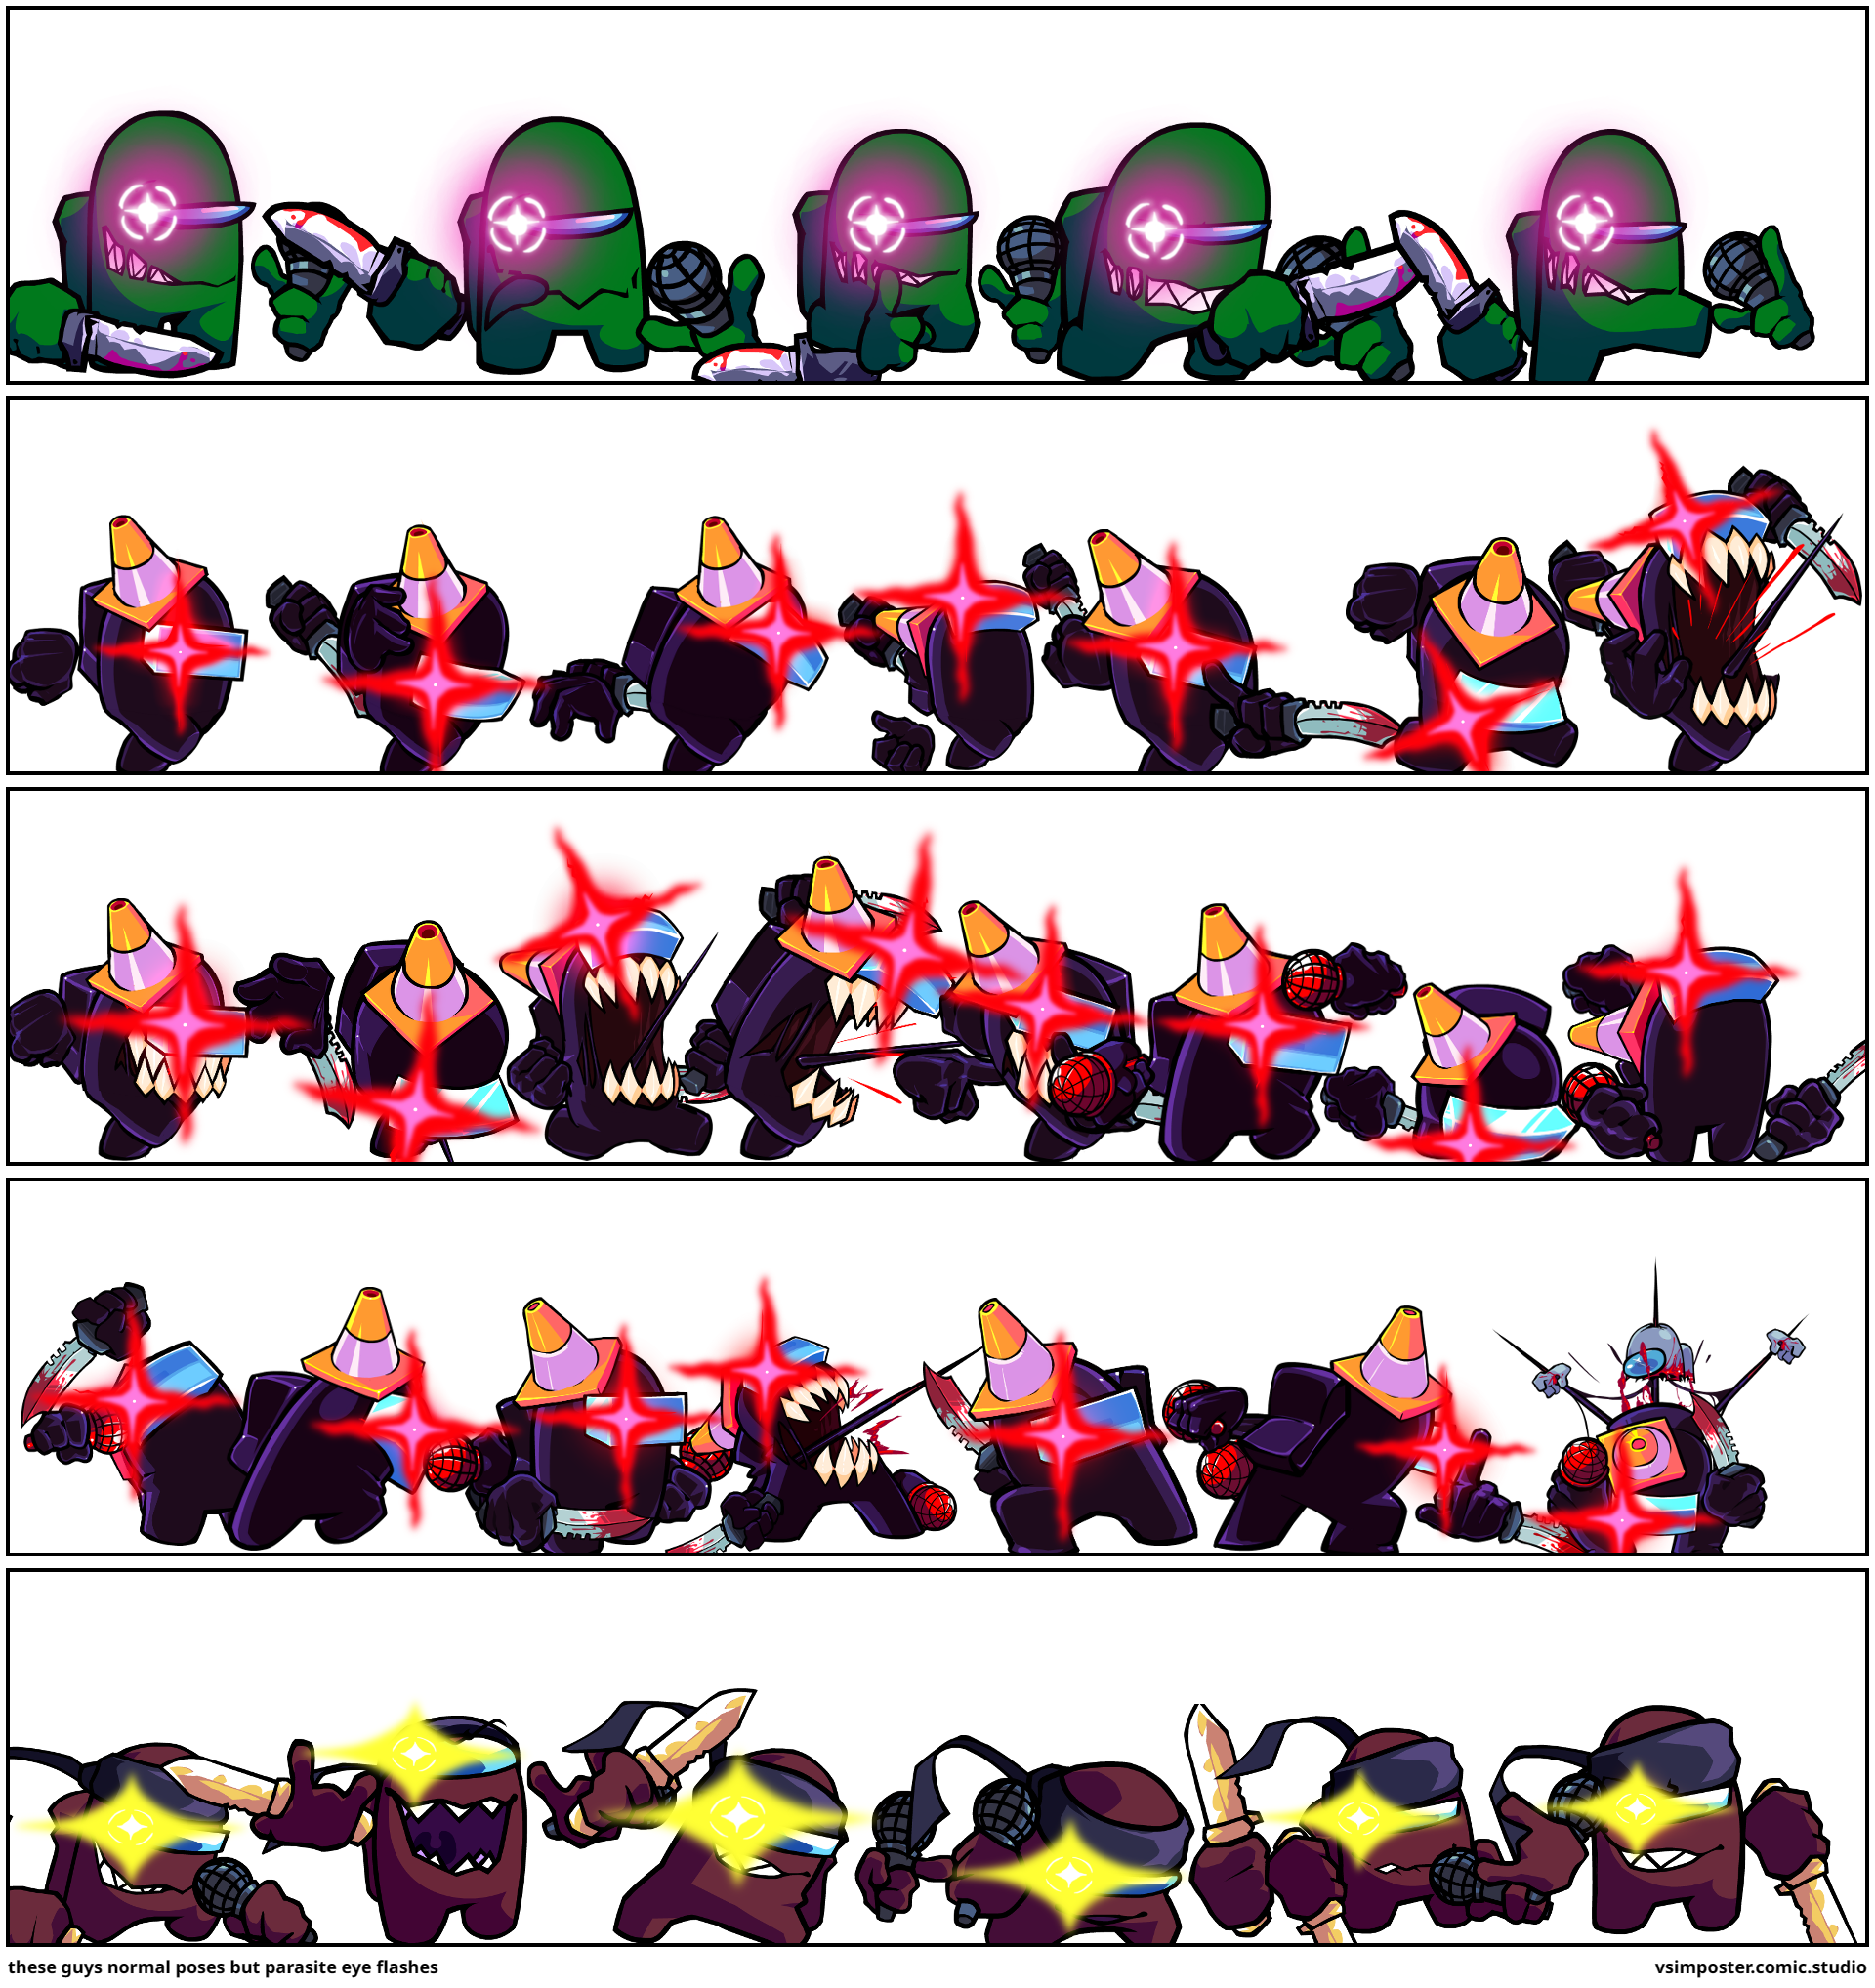 these guys normal poses but parasite eye flashes